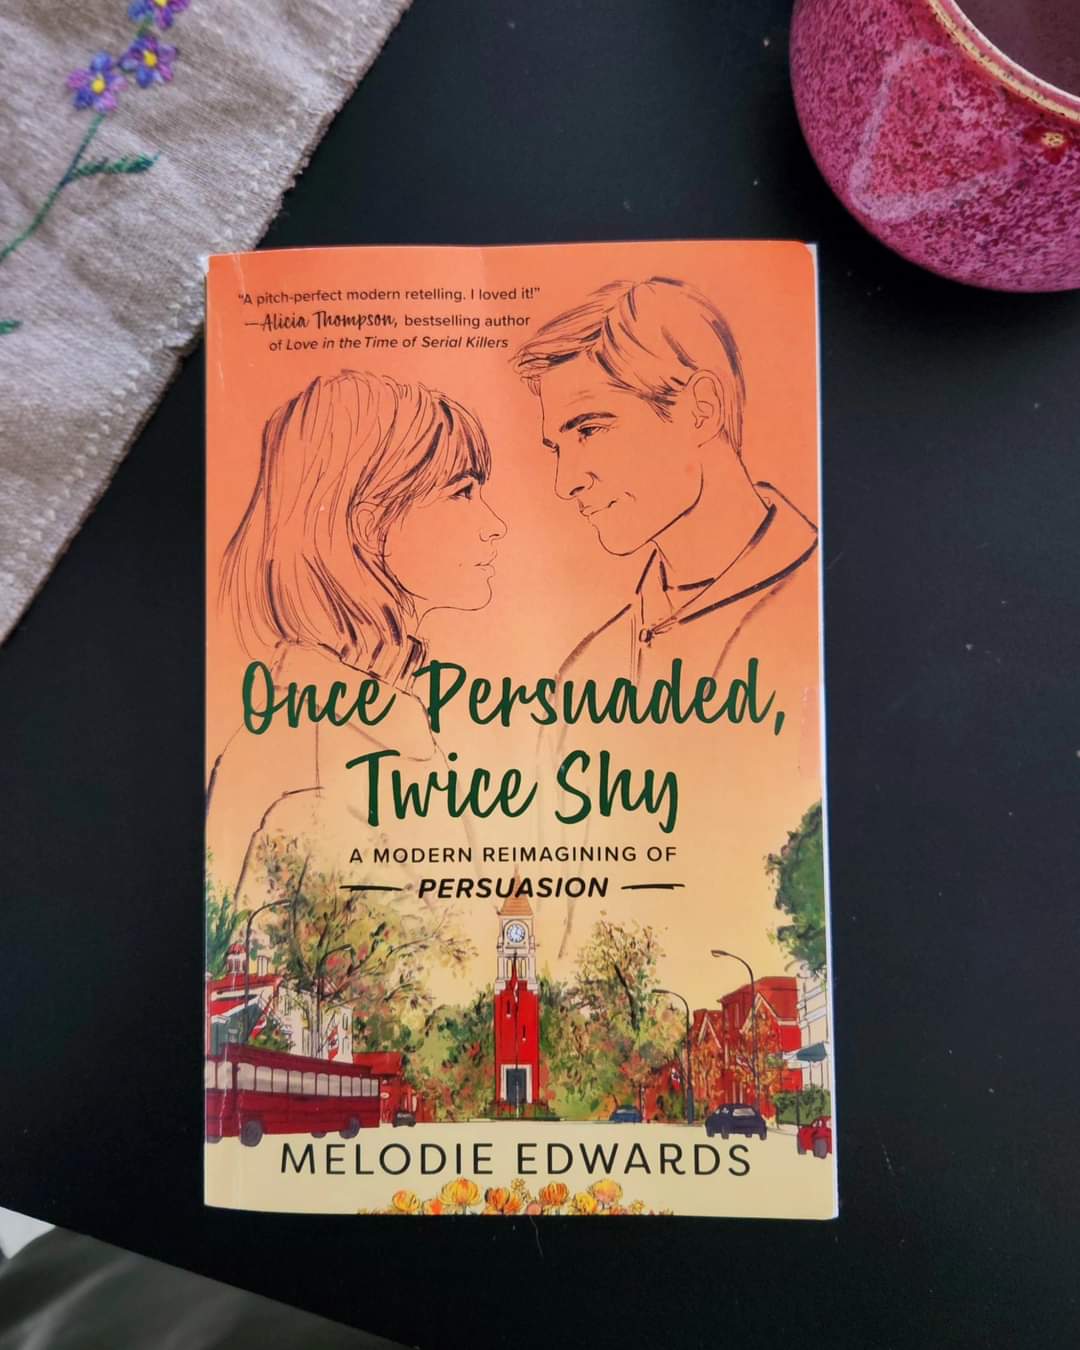 Book Review of ONCE PERSUADED, TWICE SHY